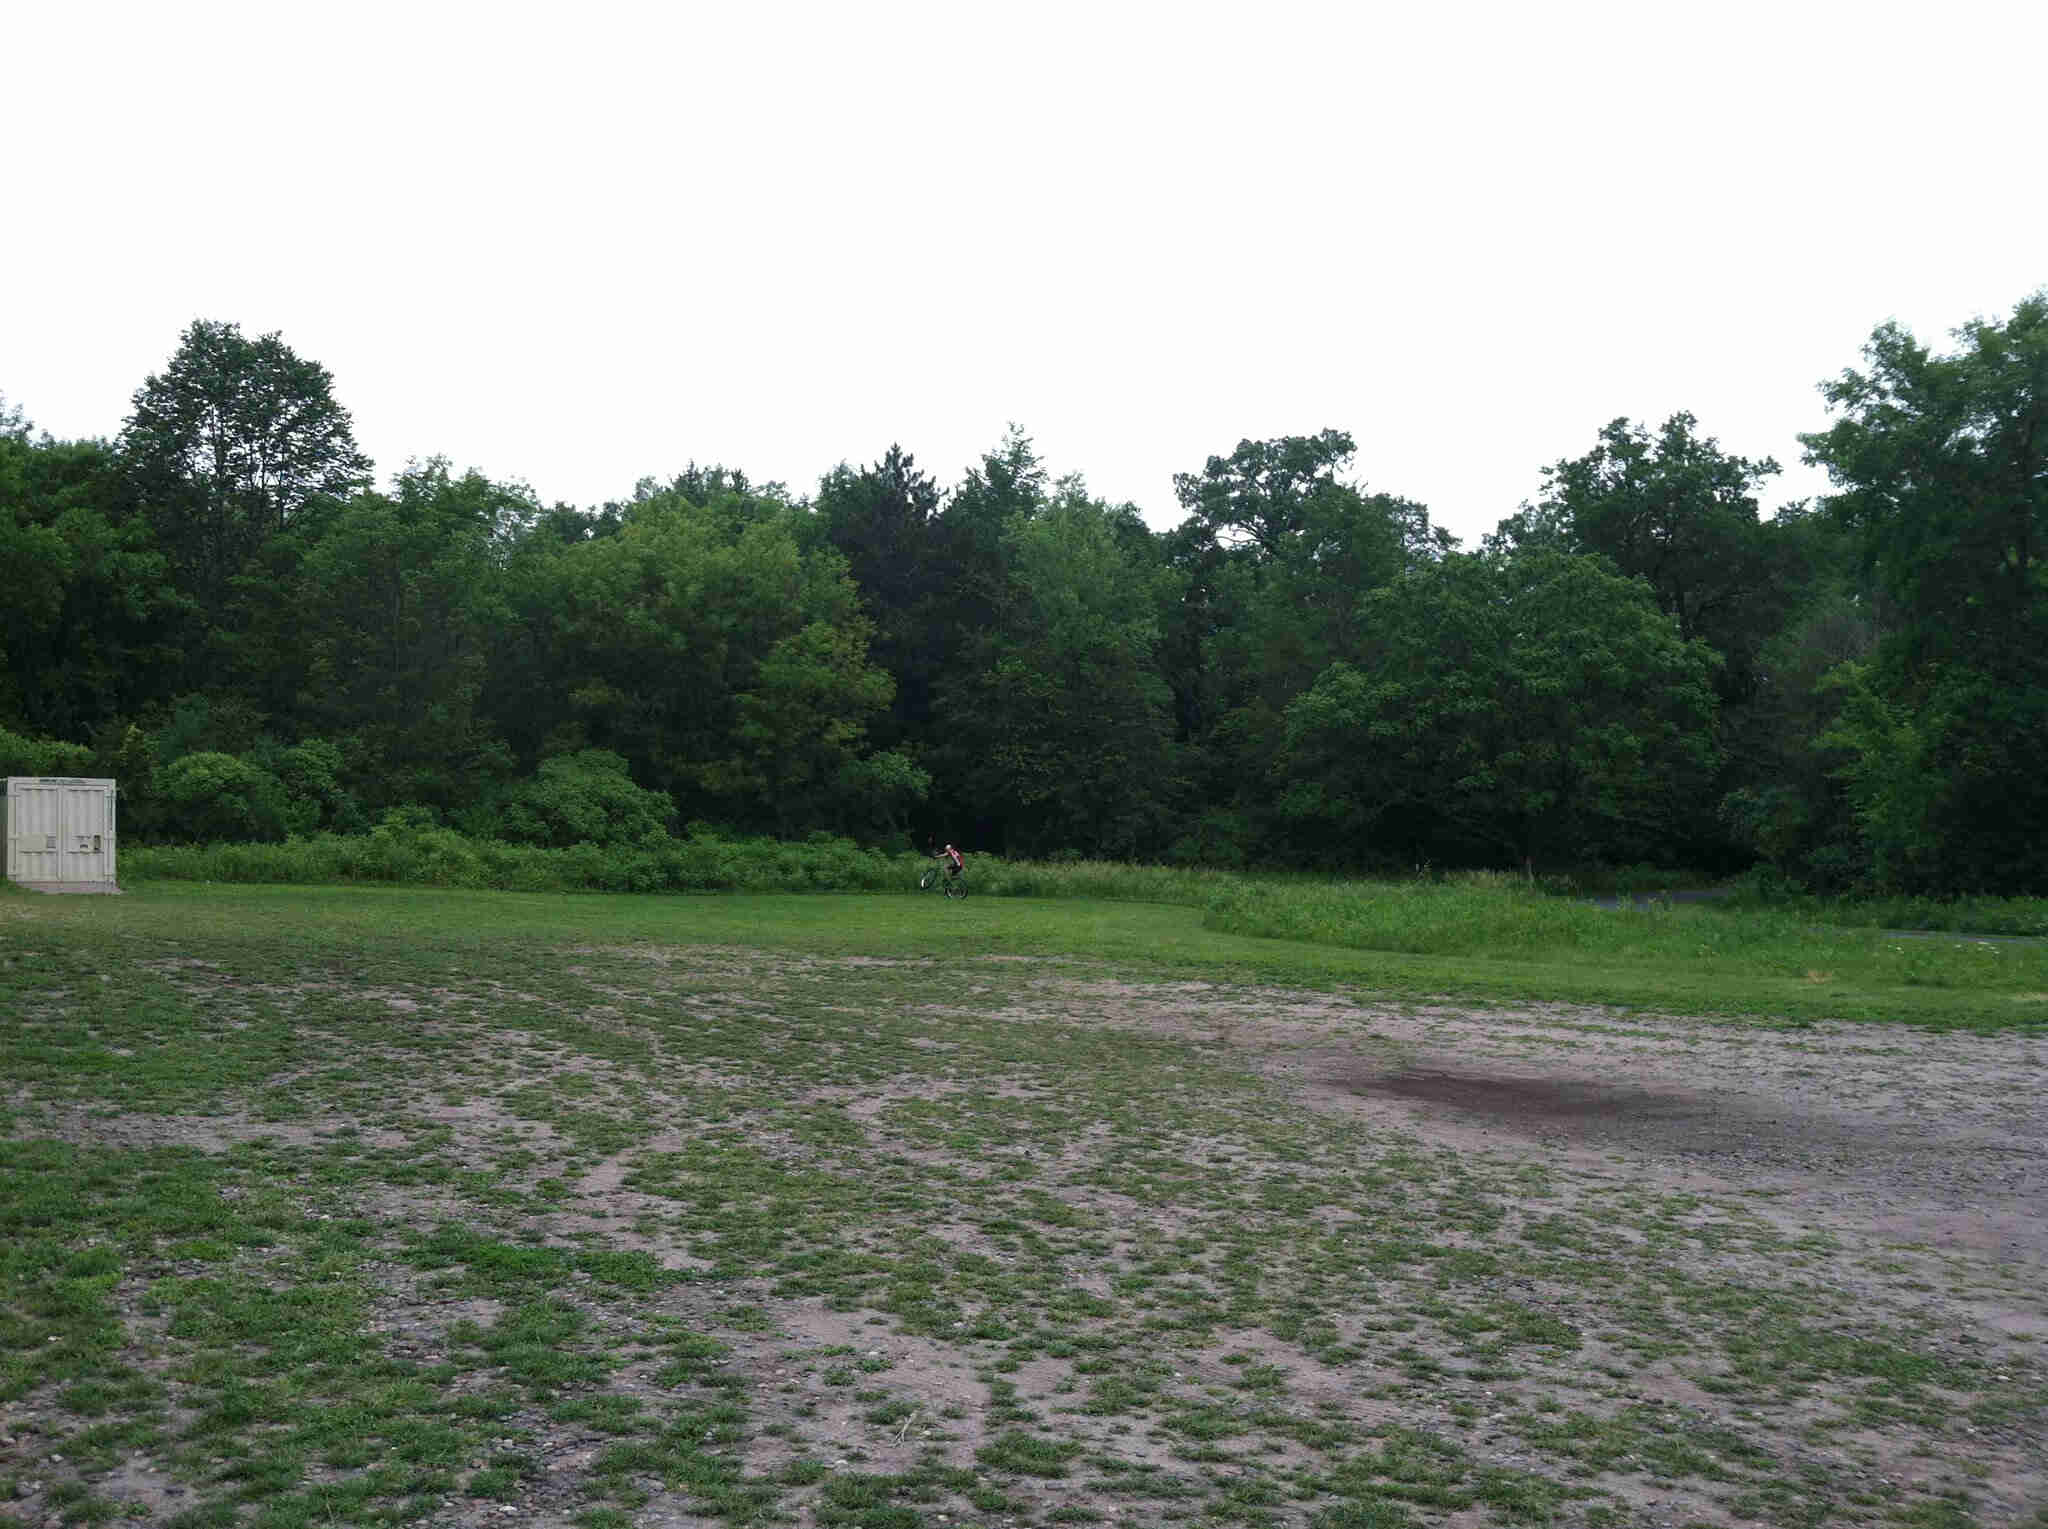 A dirt and grass field with a cyclist in the distance, riding a Surly Krampus bike across a tree line